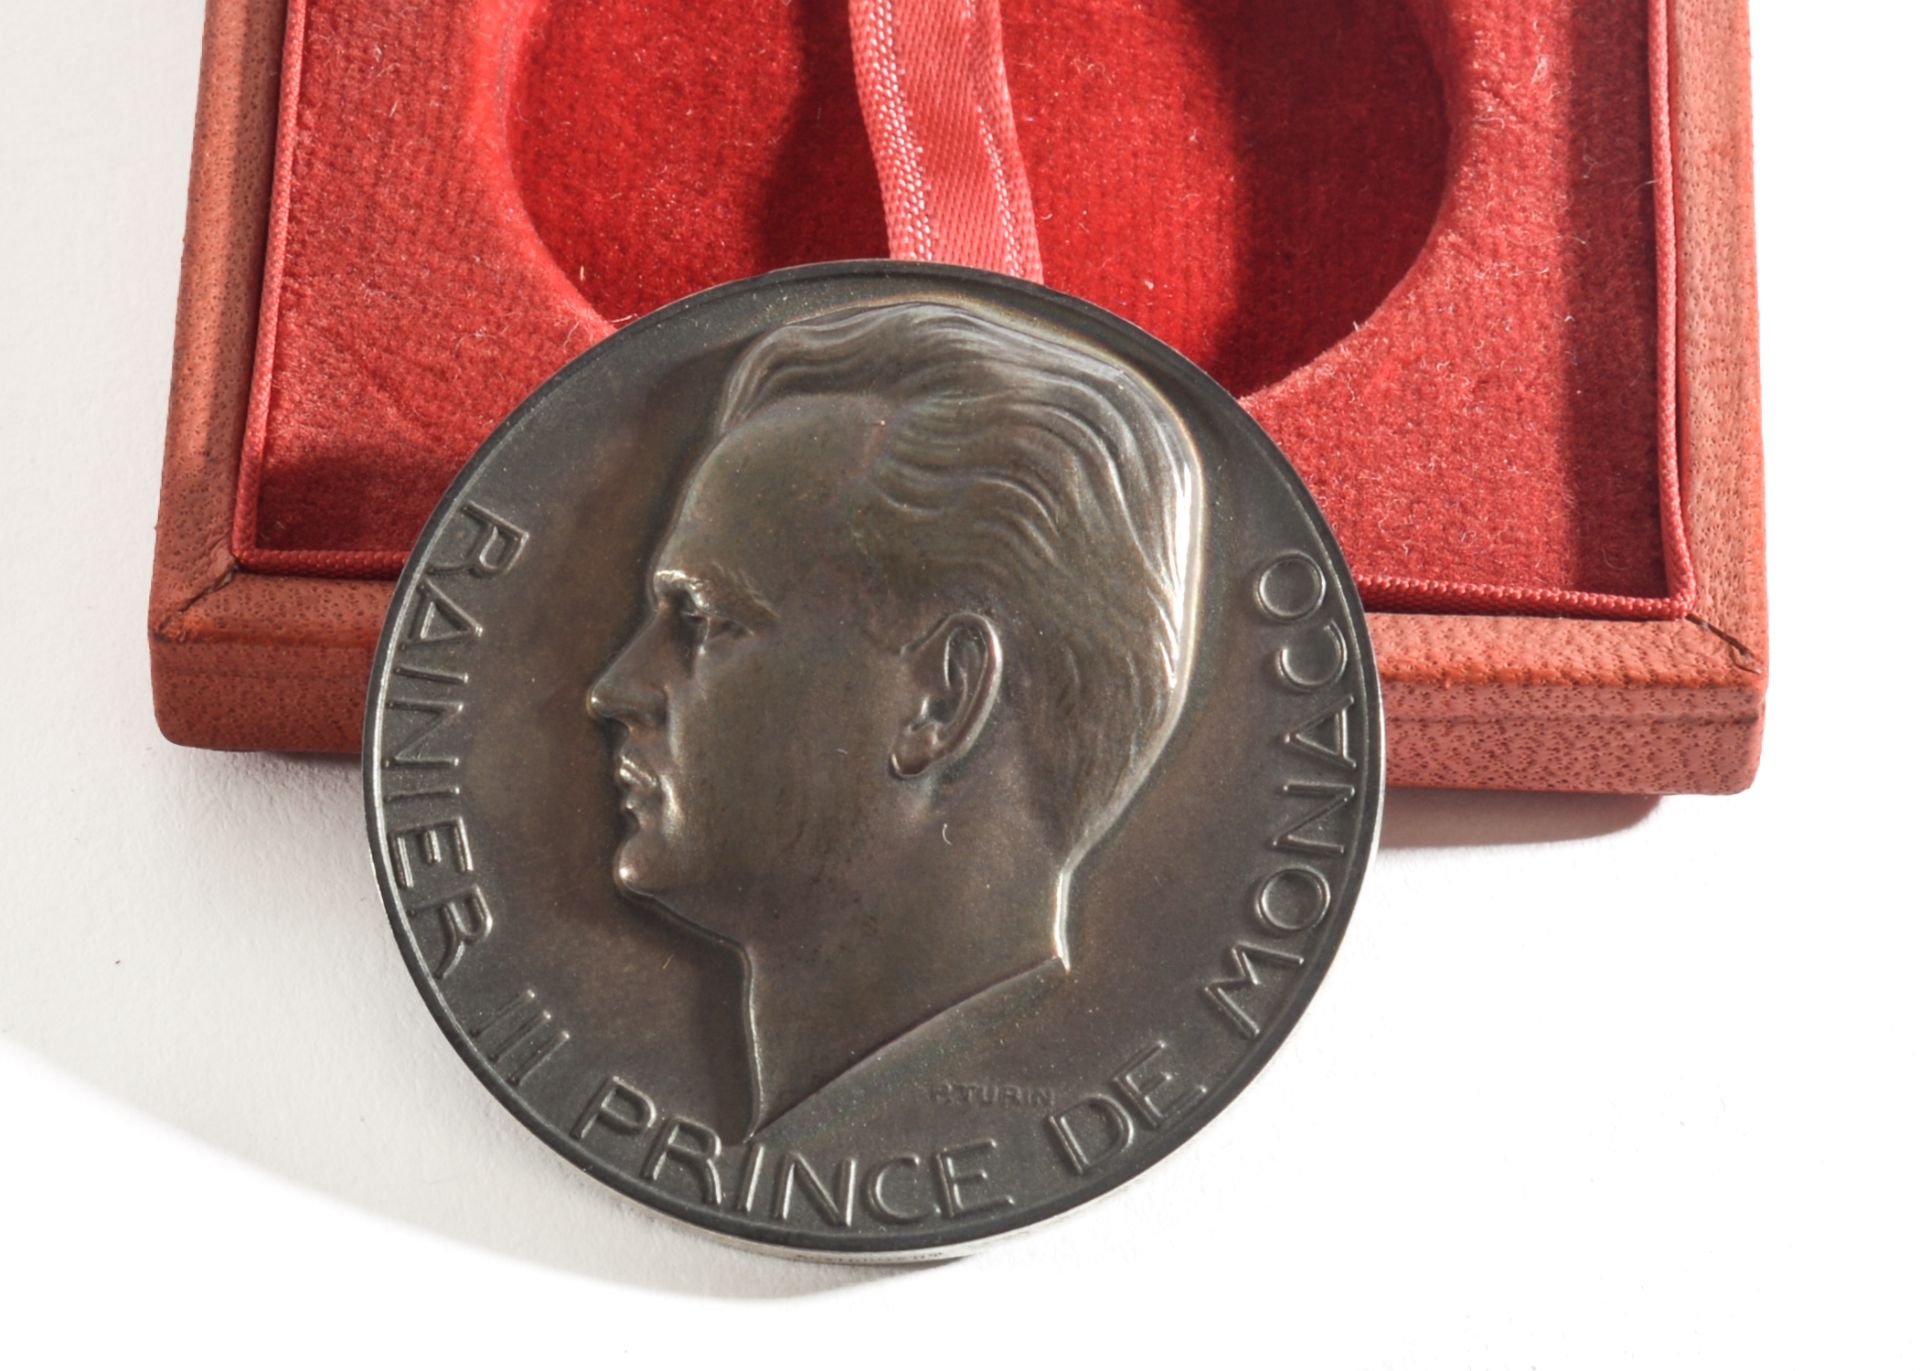 A Cast Medal, 40mm in diameter, bearing a Relief of Rainier III Prince De Monaco and his Head on